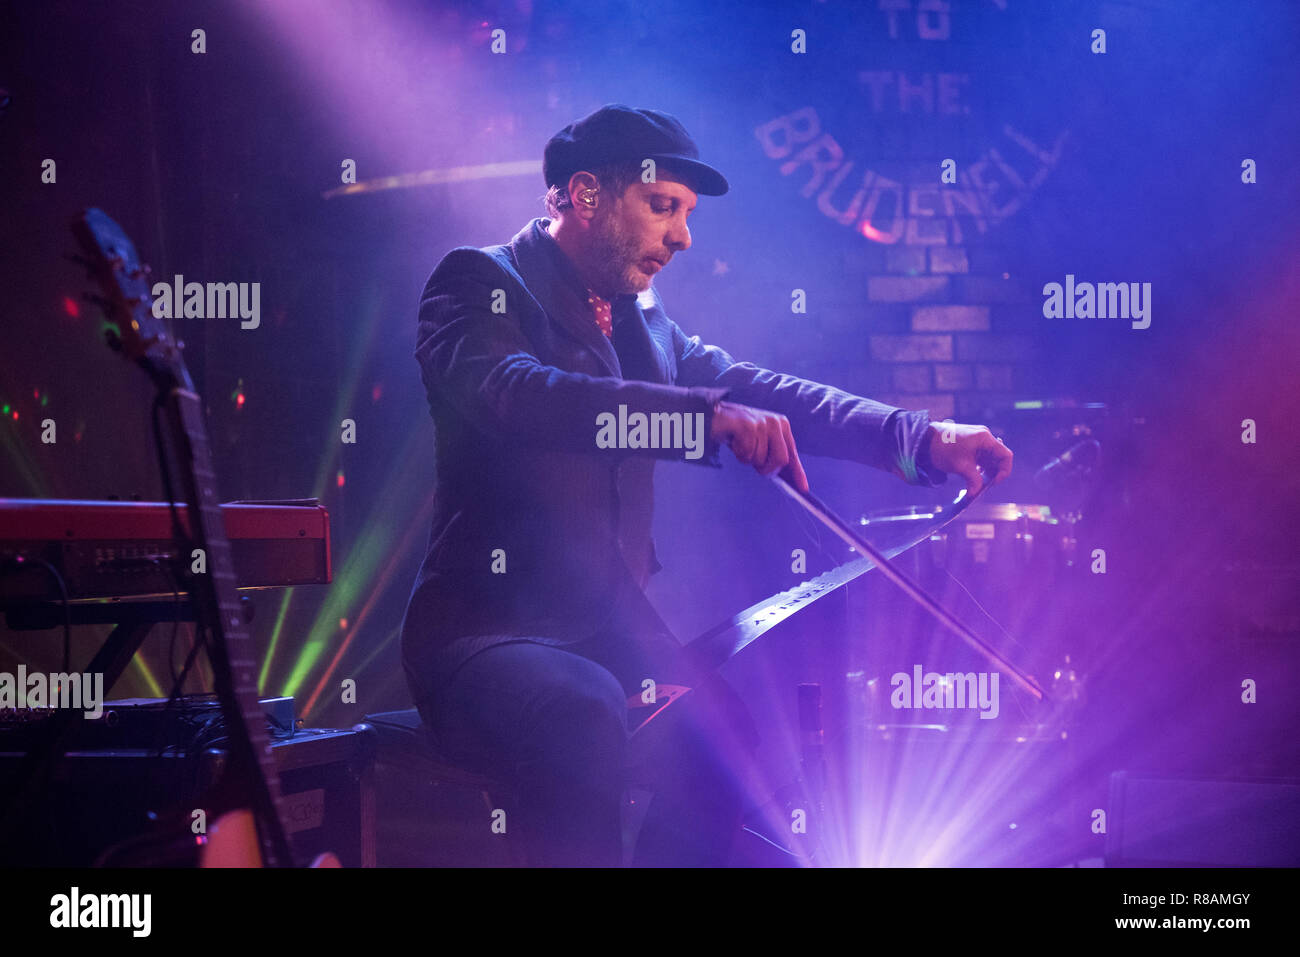 Leeds, UK. 13th Dec 2018. American rock band Mercury Rev in concert at Brudenell Social Club, Leeds, UK, 13 December 2018. Jonathan Donahue plays the musical saw during the gig. Credit: John Bentley/Alamy Live News Stock Photo